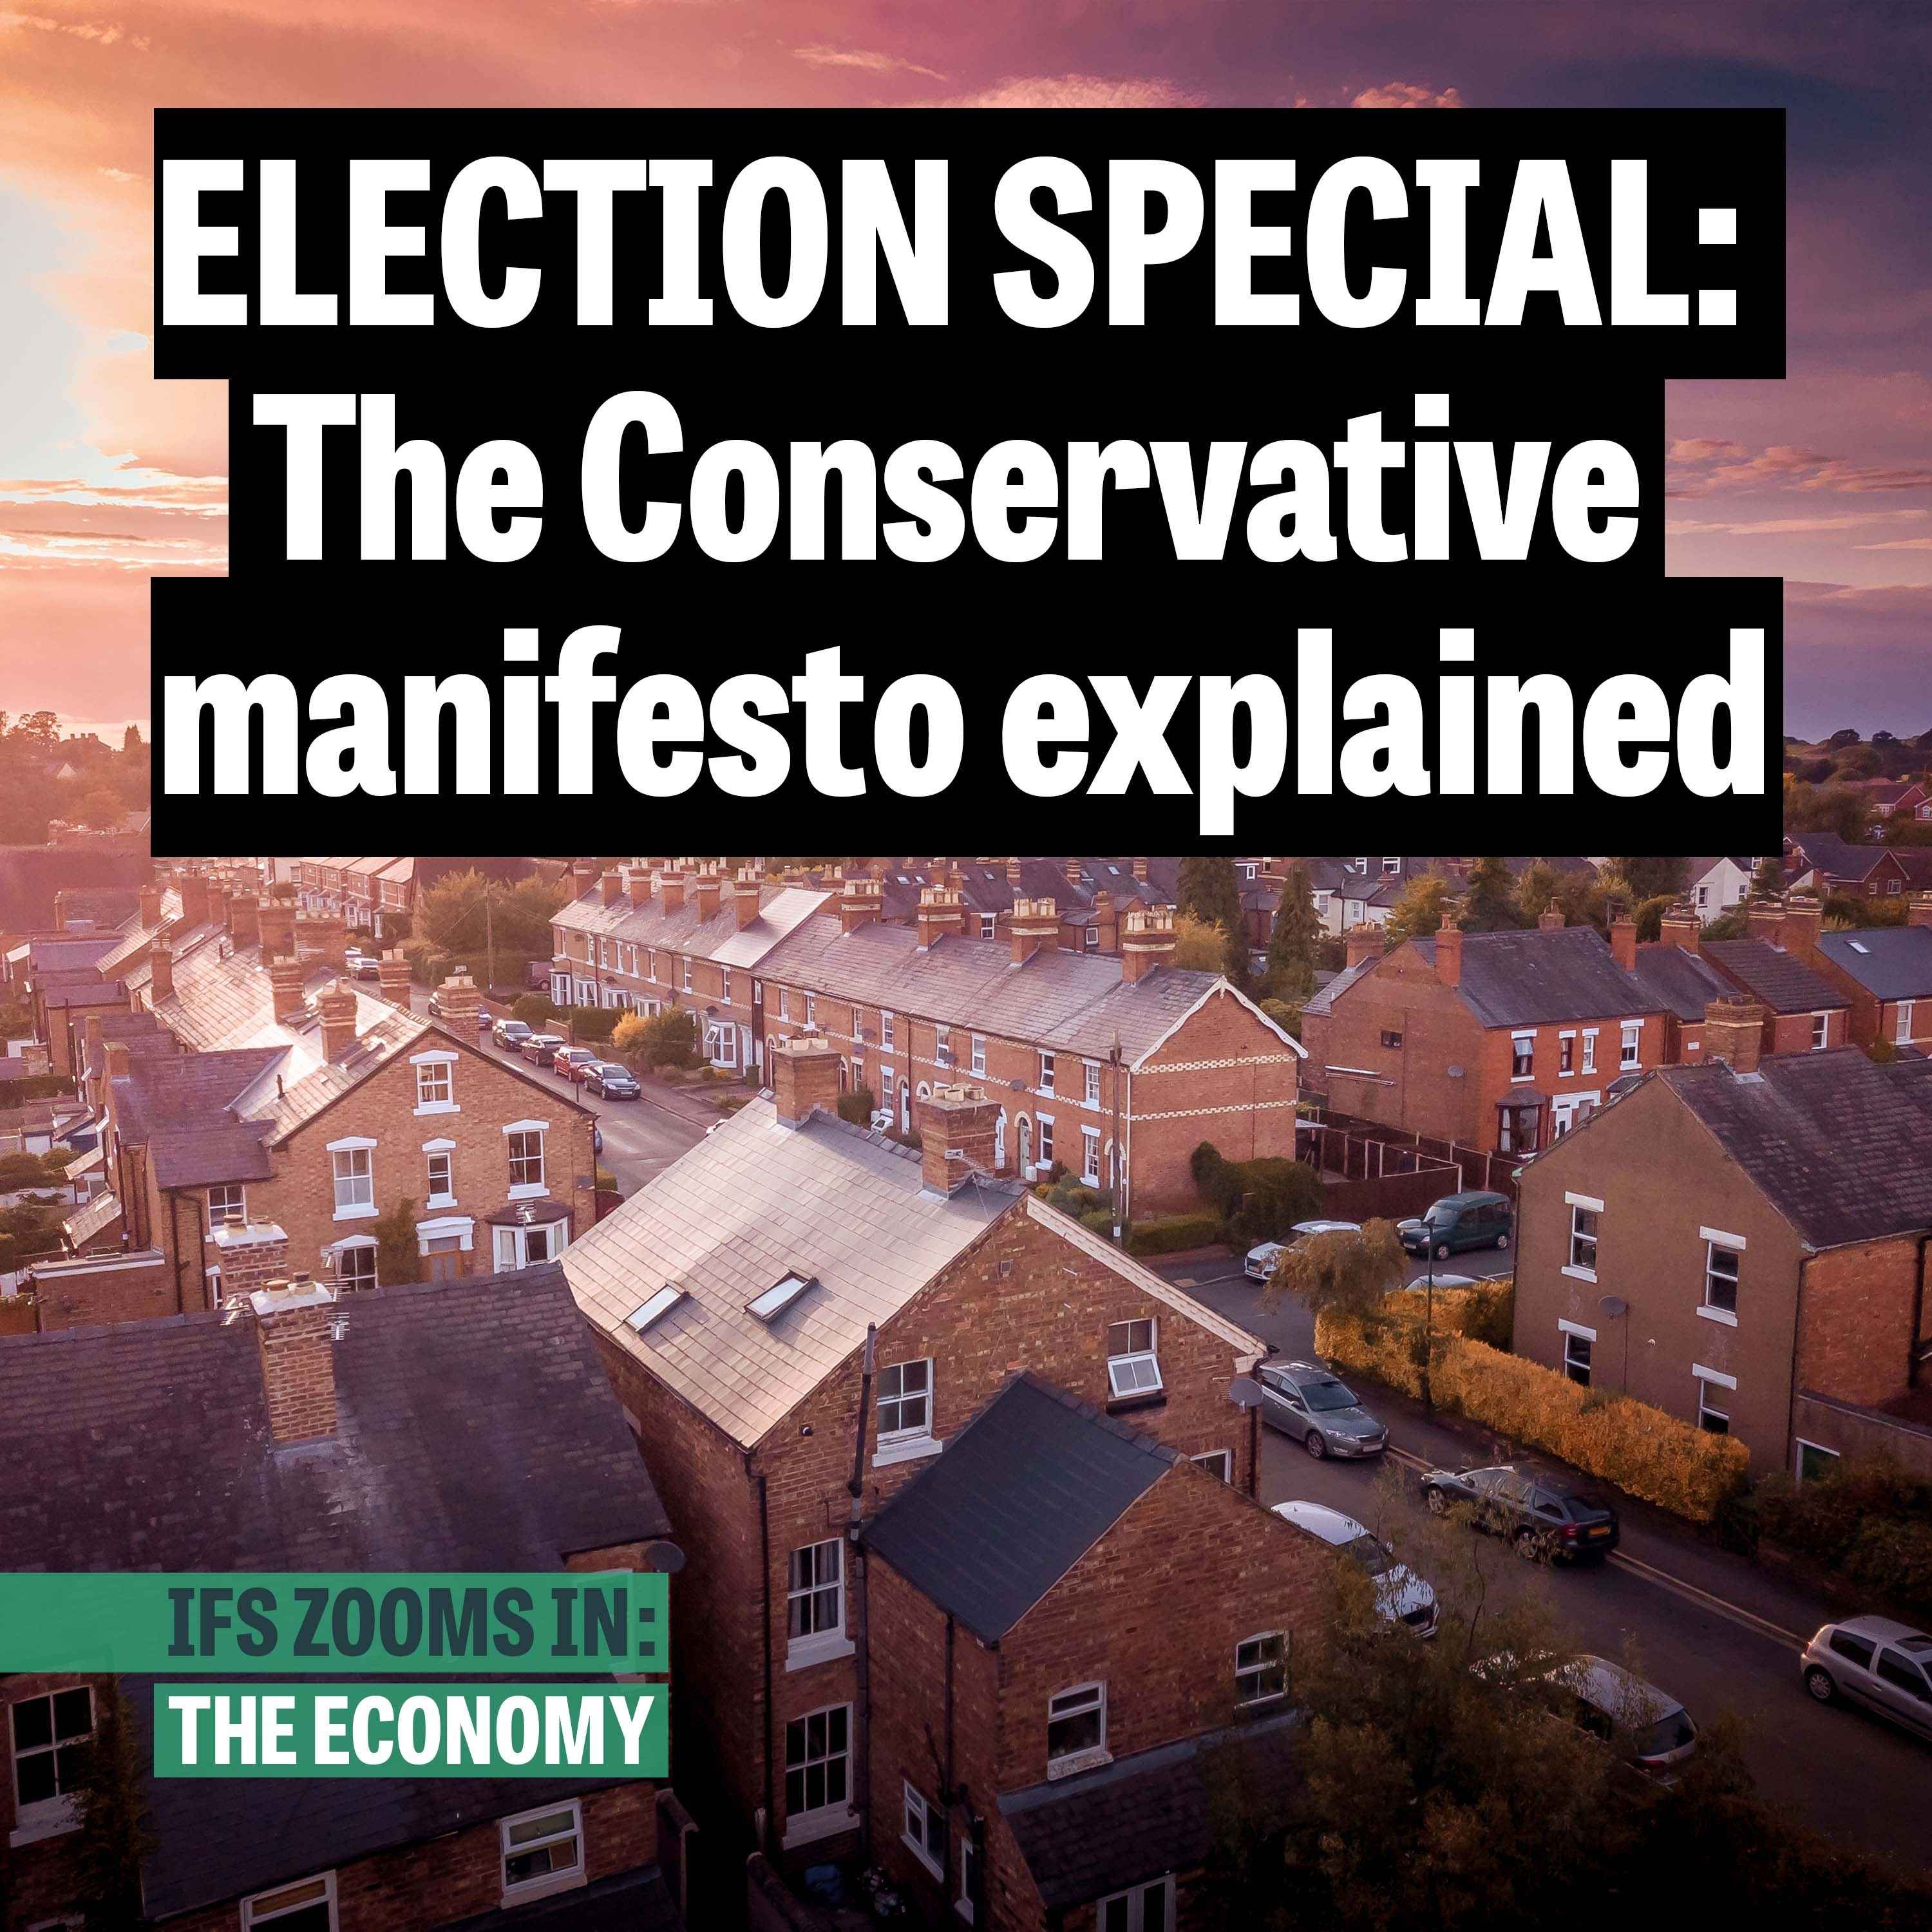 ELECTION SPECIAL: The Conservative manifesto explained